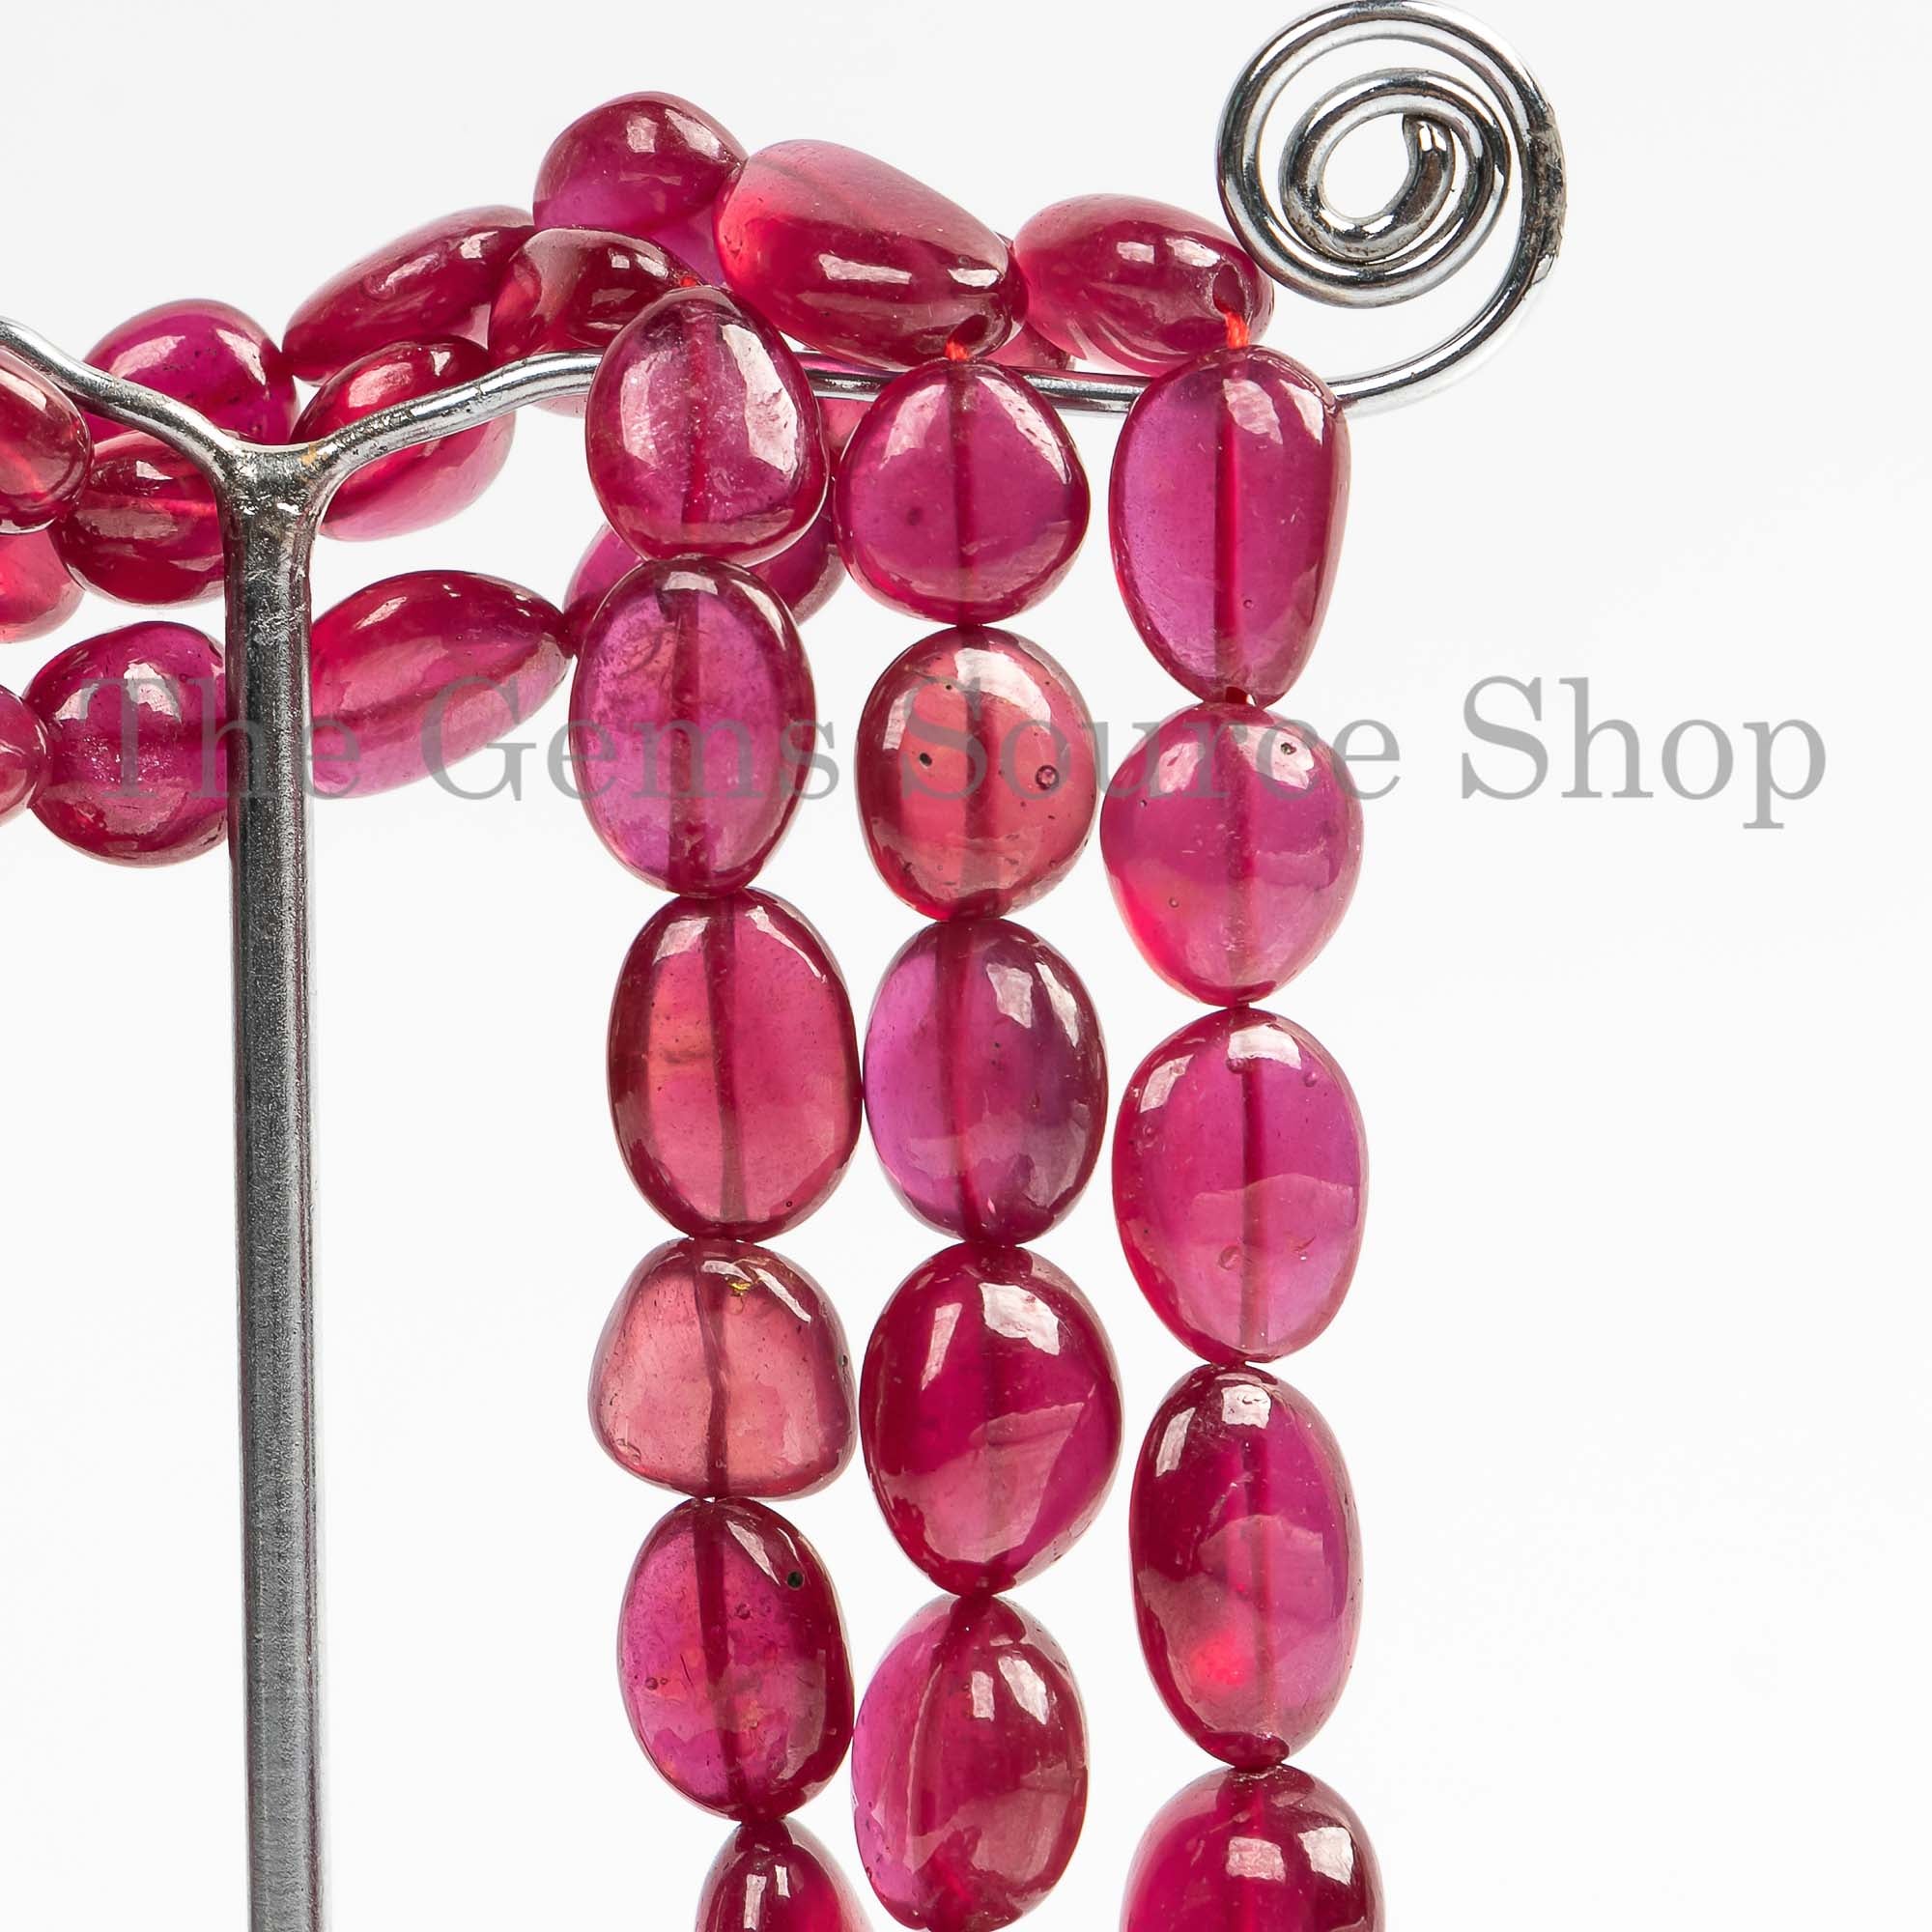 AAA Quality Ruby Smooth Nuggets Beads, Ruby Nugget Beads, 6x8-9x12mm Ruby Smooth Beads, Natural Ruby Beads, Fancy Beads